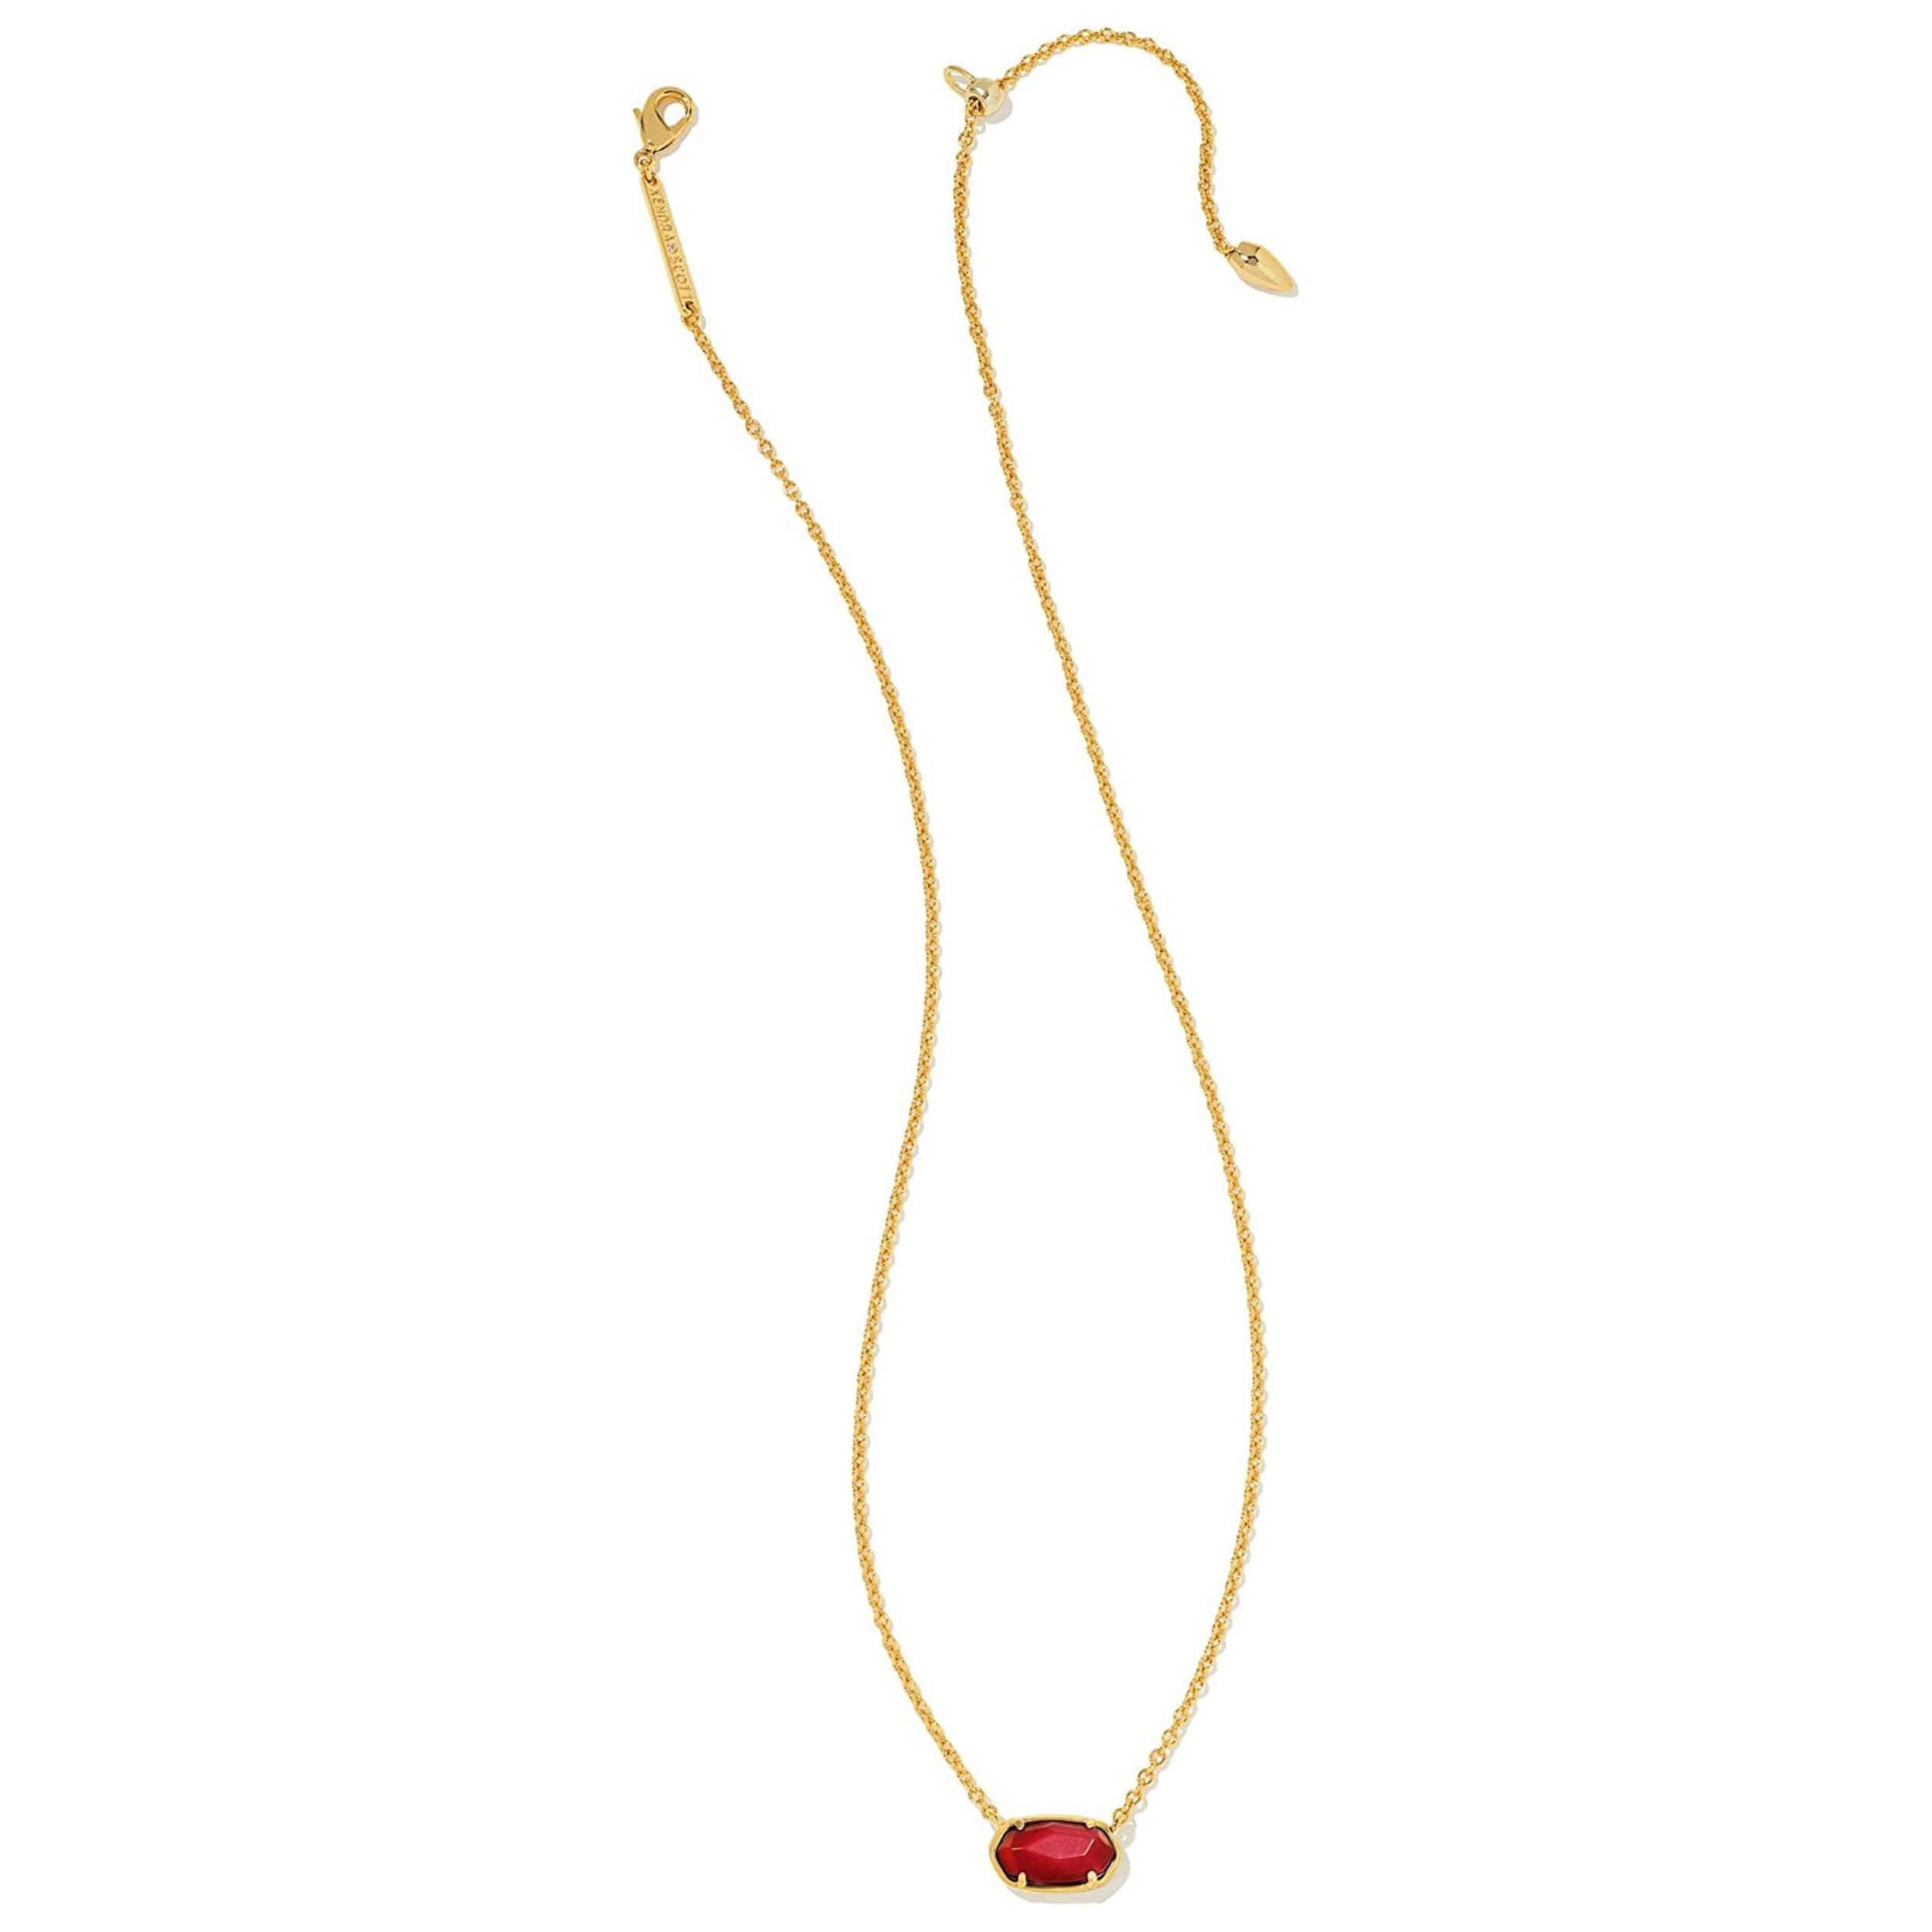 Kendra Scott | Grayson Gold Pendant Necklace in Maroon Magnesite - Giddy Up Glamour Boutique